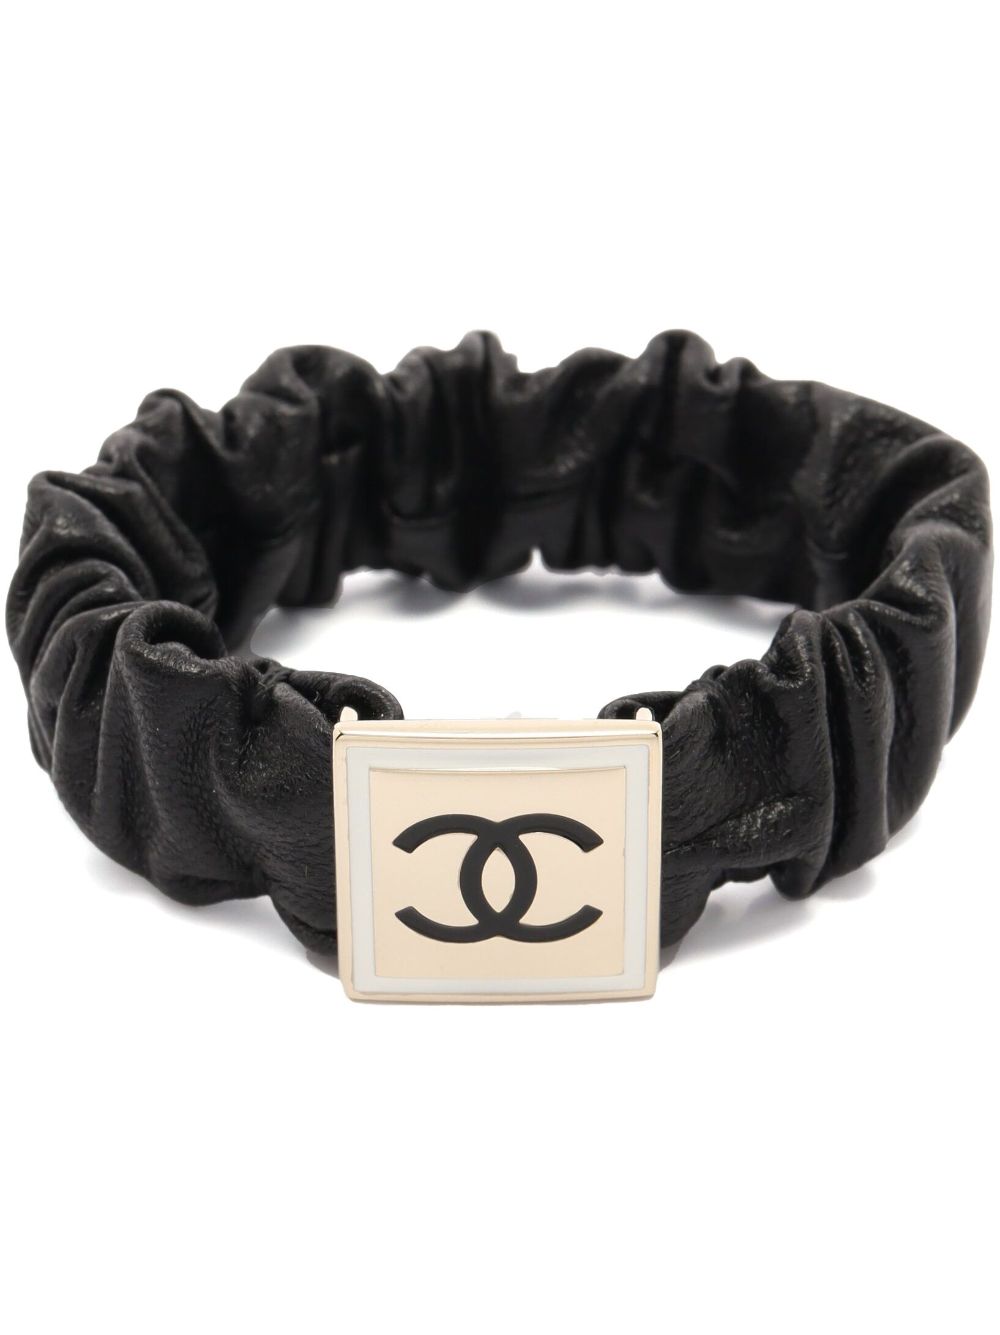 Chanel Scrunchie - 2 For Sale on 1stDibs  chanel leather scrunchie, scrunchie  chanel, chanel.scrunchie